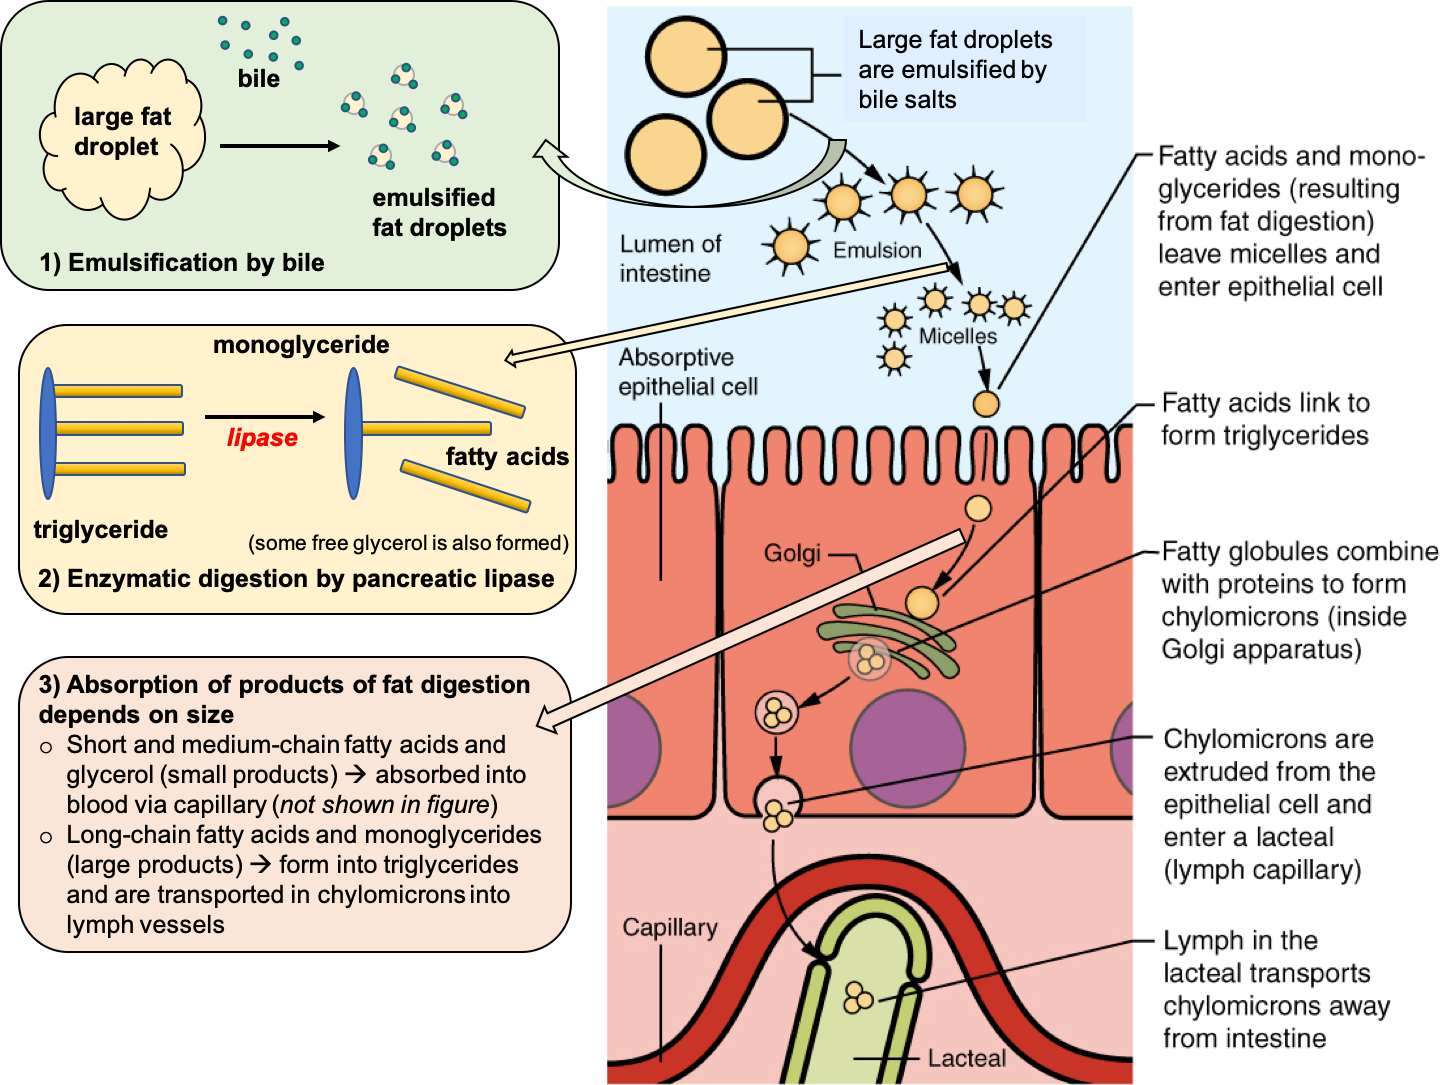 A cartoon diagram summarizes the steps of emulsification, enzymatic digestion, and absorption of lipids in the small intestine. The diagram shows large fat droplets being emulsified to smaller droplets, then being incorporated into micelles in order to bring them to the edge of the enterocytes. Then, fatty acids are absorbed into the enterocytes and incorporated into chylomicrons in the golgi of the cell, finally being absorbed into the lacteal to enter the lymph.